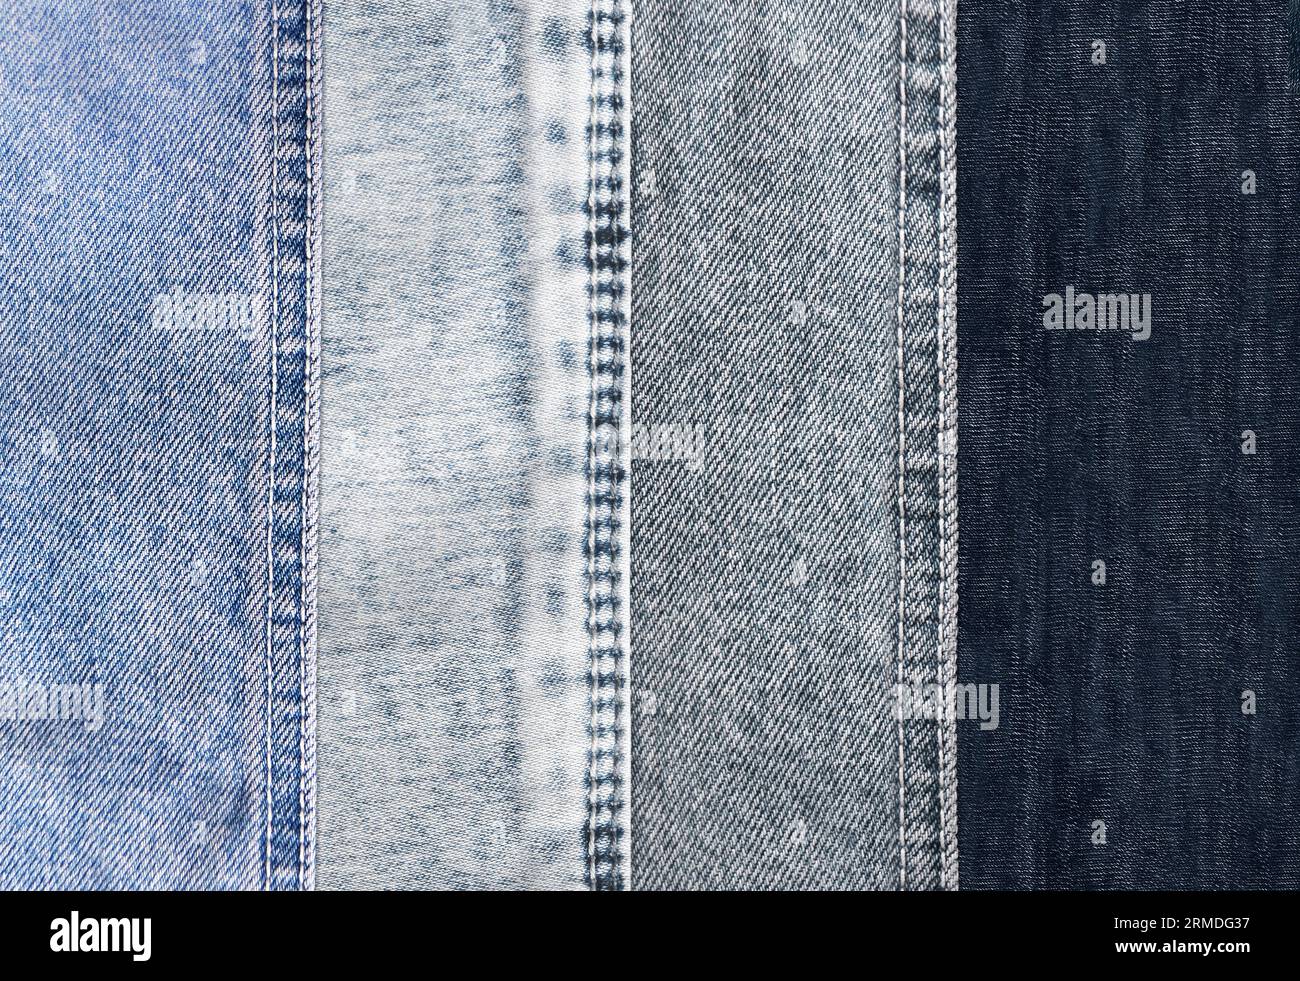 Horizontal or vertical background with denim patches of light grey, blue and black colors cotton texture. Decorative striped backdrop with blue, indig Stock Photo